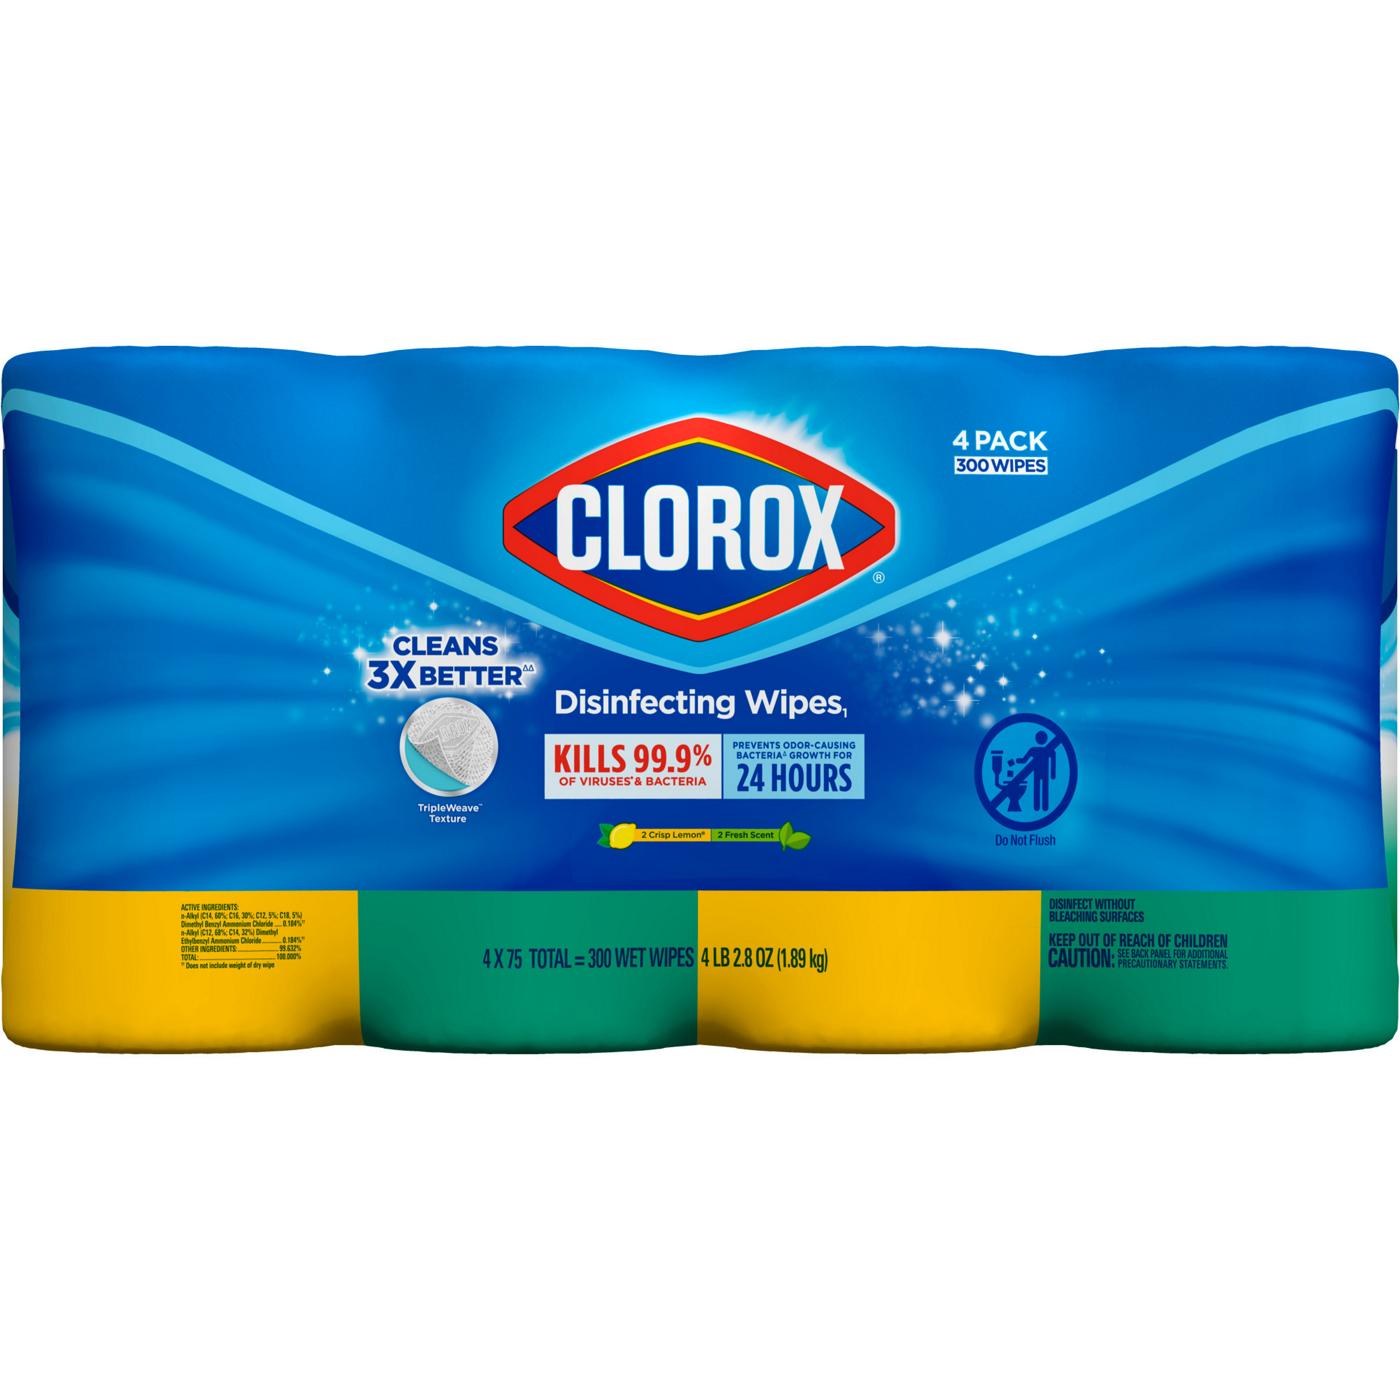 Clorox Disinfecting Wipes Value 4 Pack - Bleach Free Cleaning Wipes; image 1 of 9